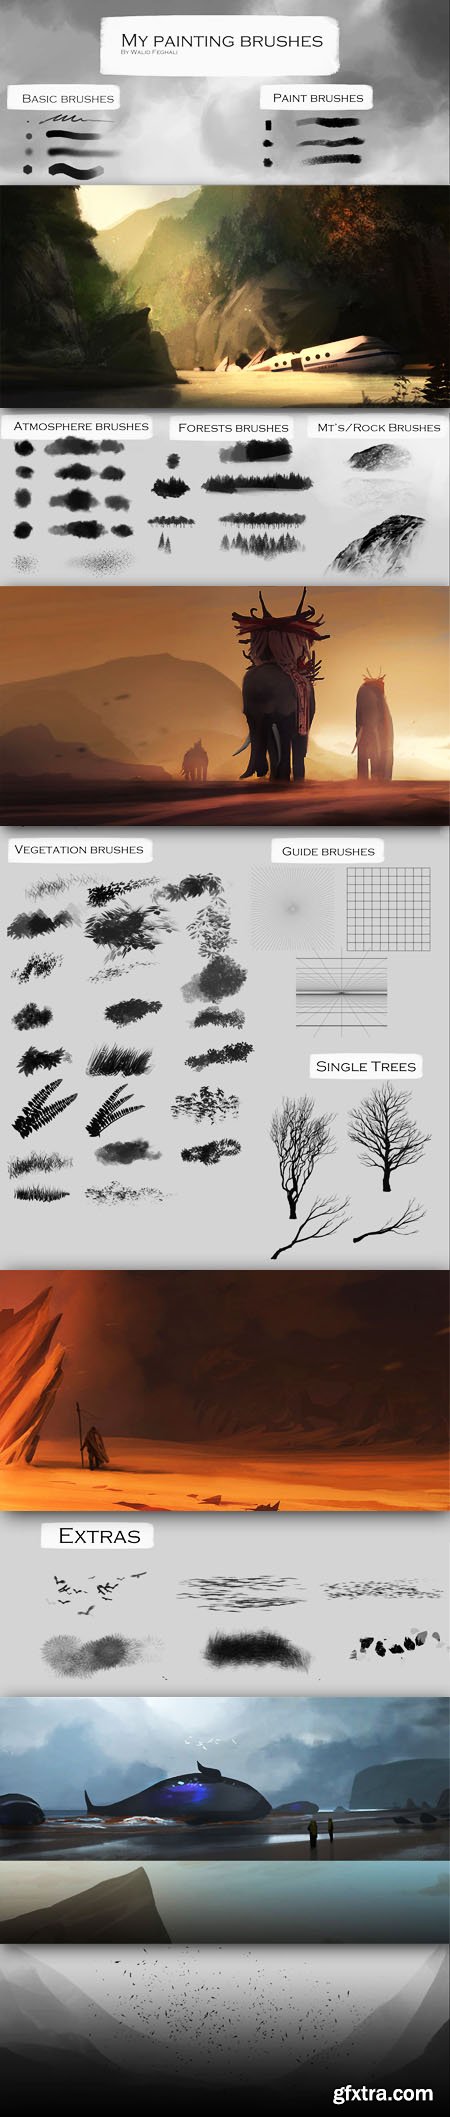 My Painting Brushes for Photoshop